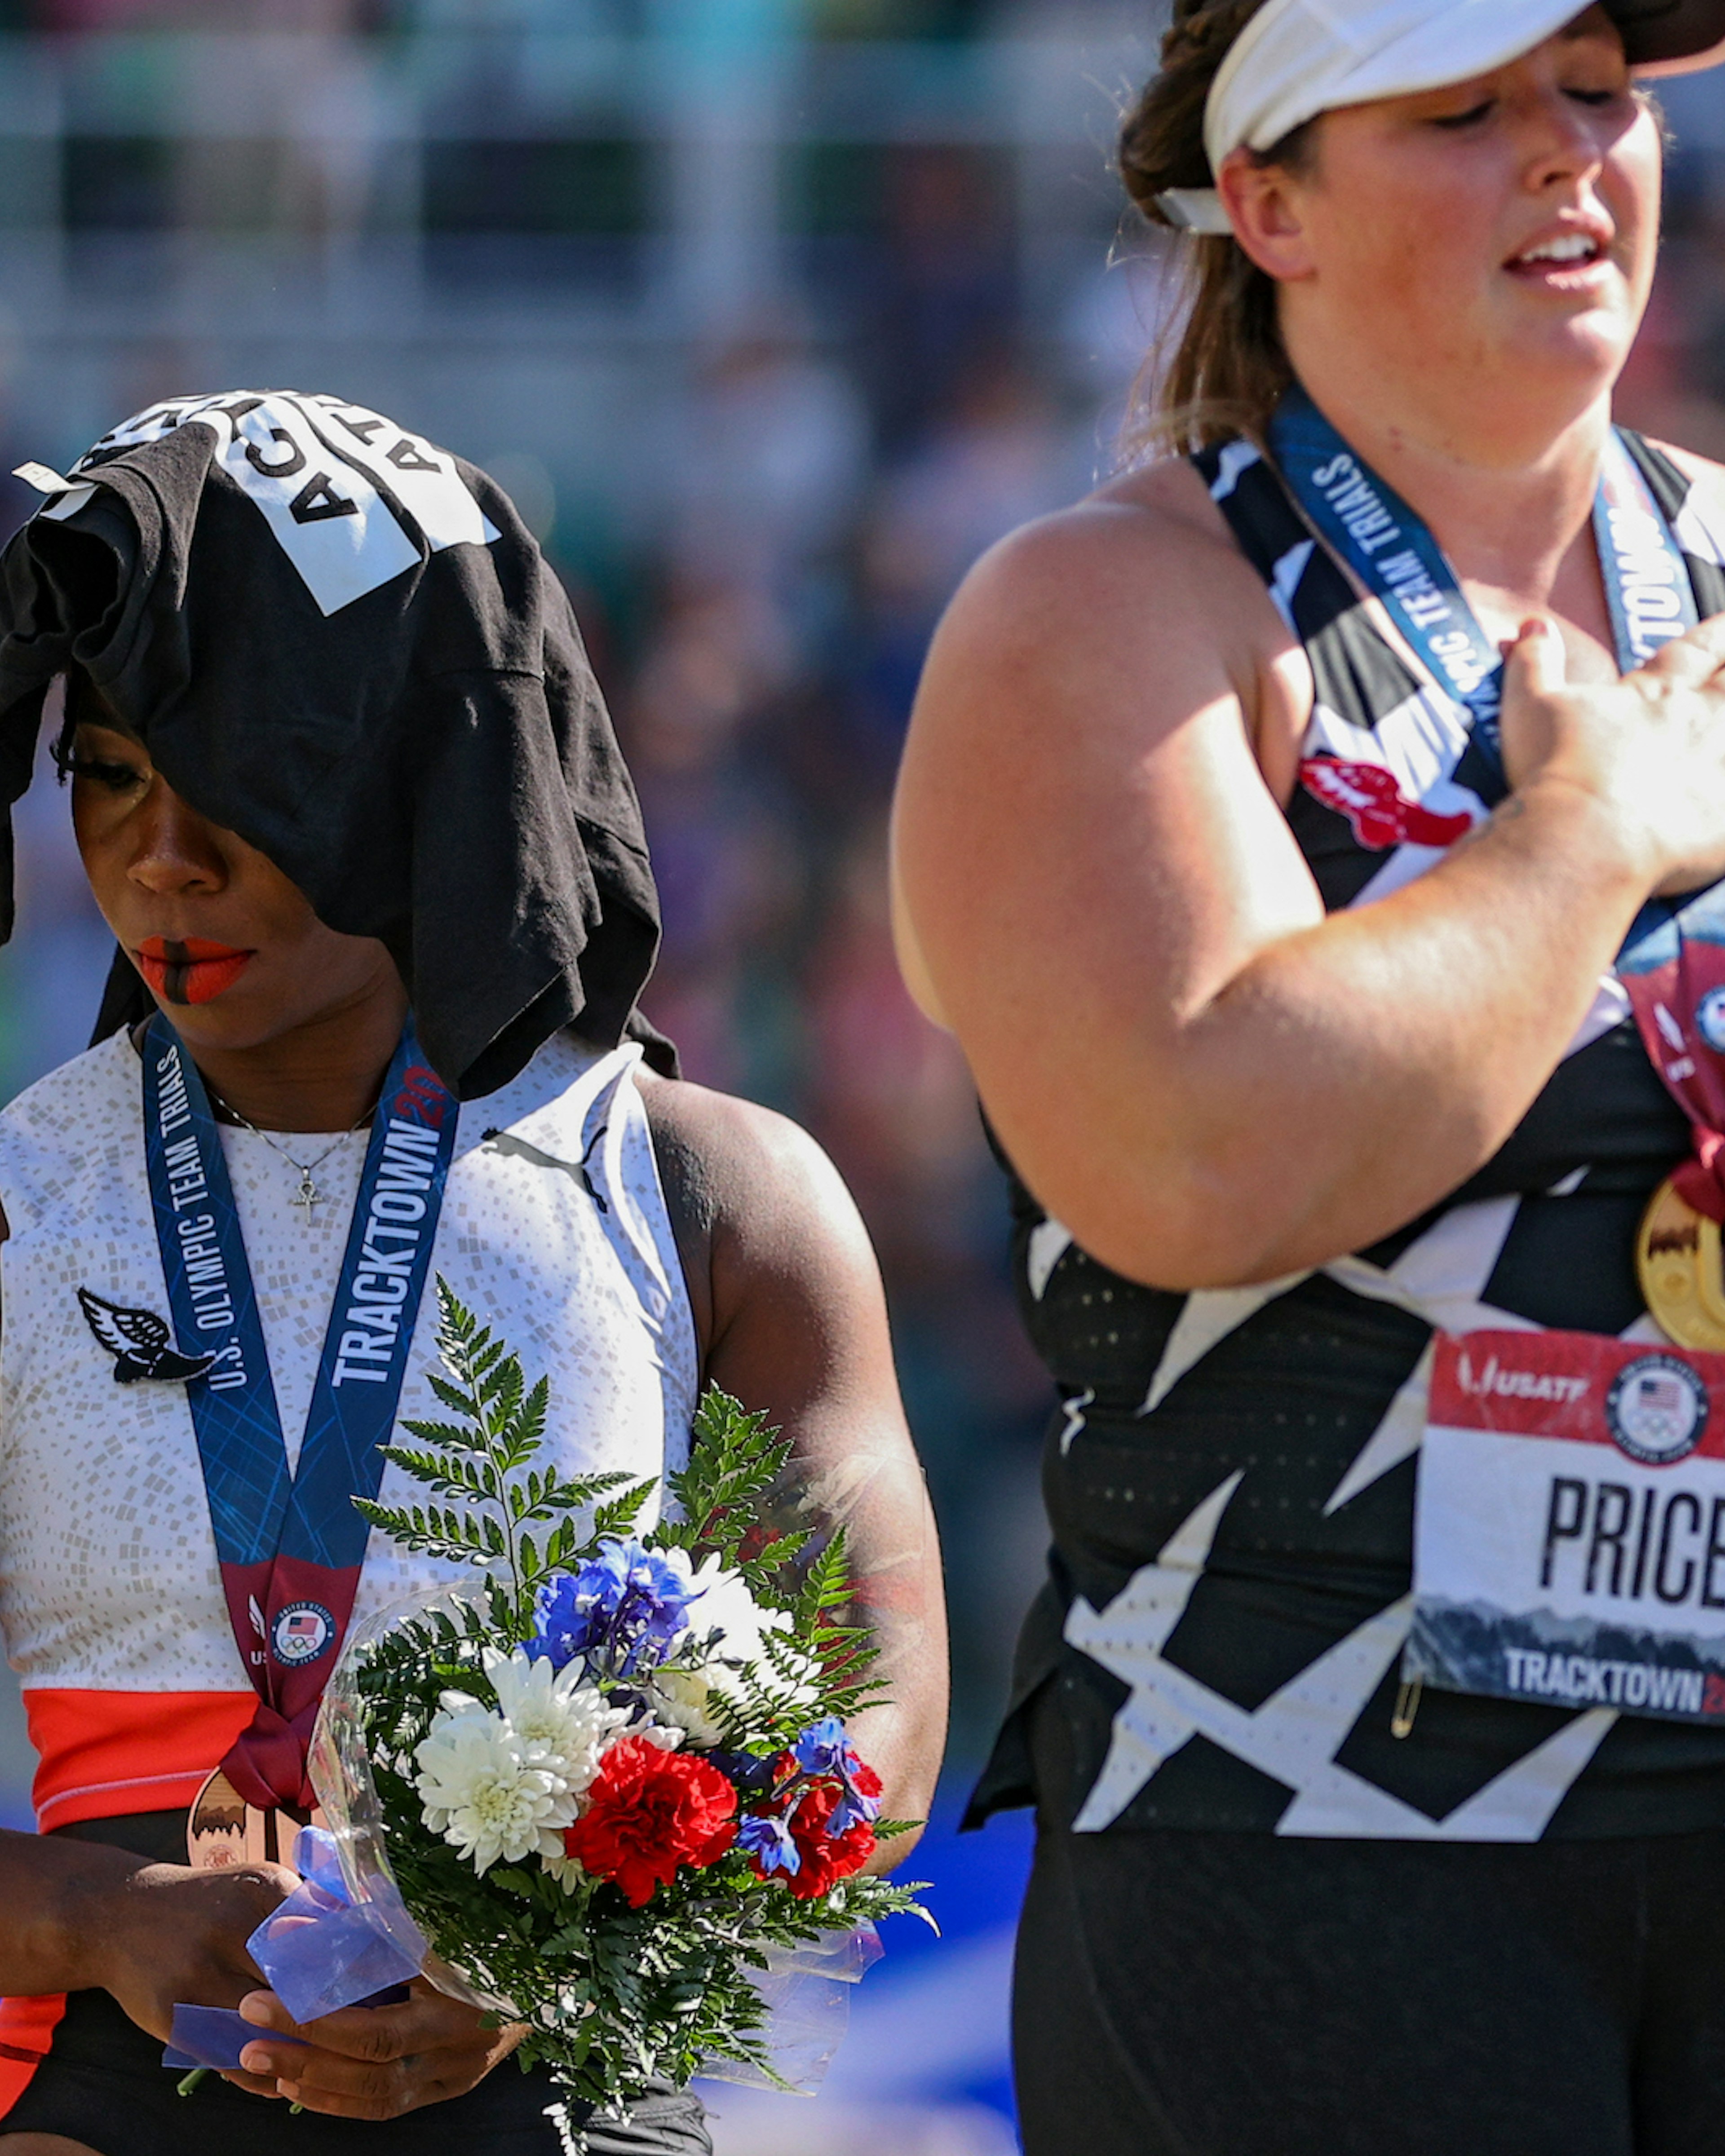 Gwendolyn Berry (L), third place, turns away from U.S. flag during the U.S. National Anthem as DeAnna Price (C), first place, also stands on the podium after the Women's Hammer Throw final on day nine of the 2020 U.S. Olympic Track &amp; Field Team Trials at Hayward Field on June 26, 2021 in Eugene, Oregon. In 2019, the USOPC reprimanded Berry after her demonstration on the podium at the Lima Pan-American Games. (Photo by Patrick Smith/Getty Images)